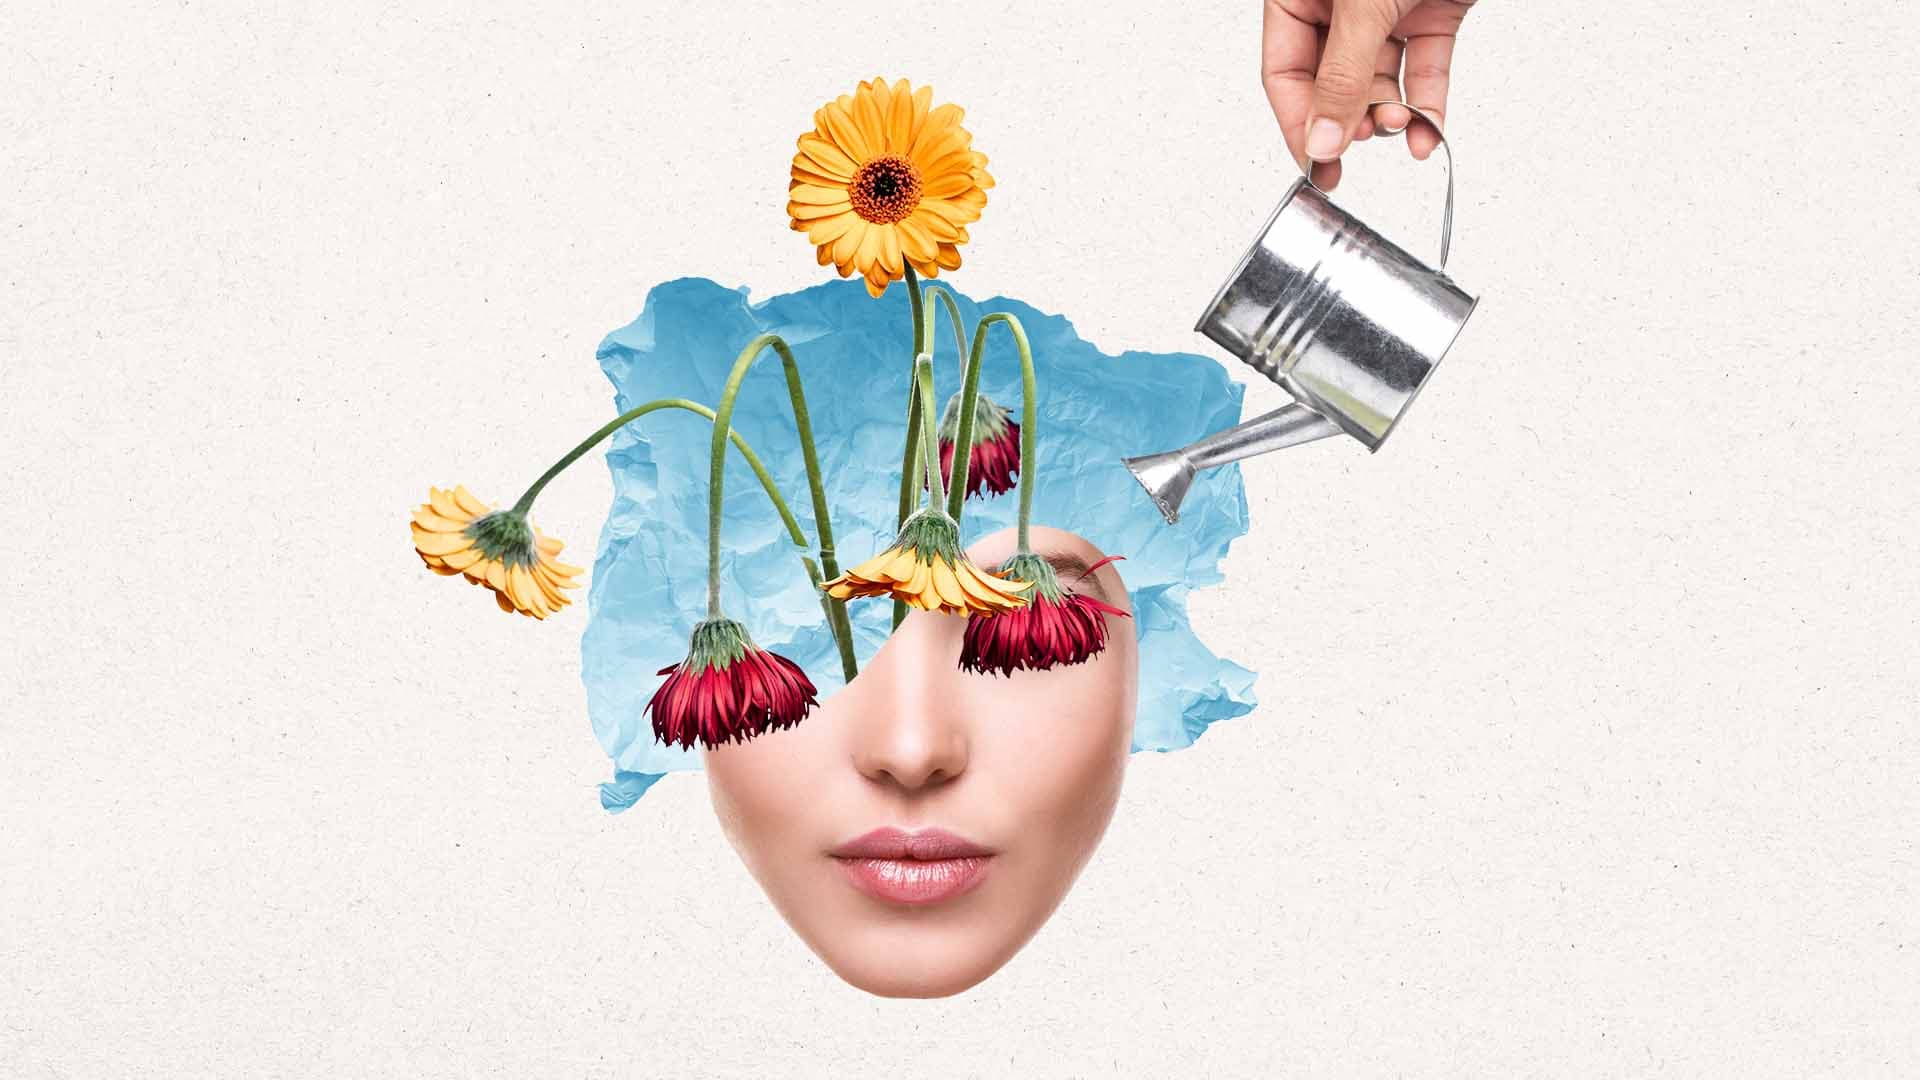 Collage image of a woman's face with flowers growing from her head. Some of the flowers are wilted and a hand holding a watering can is tending to them.